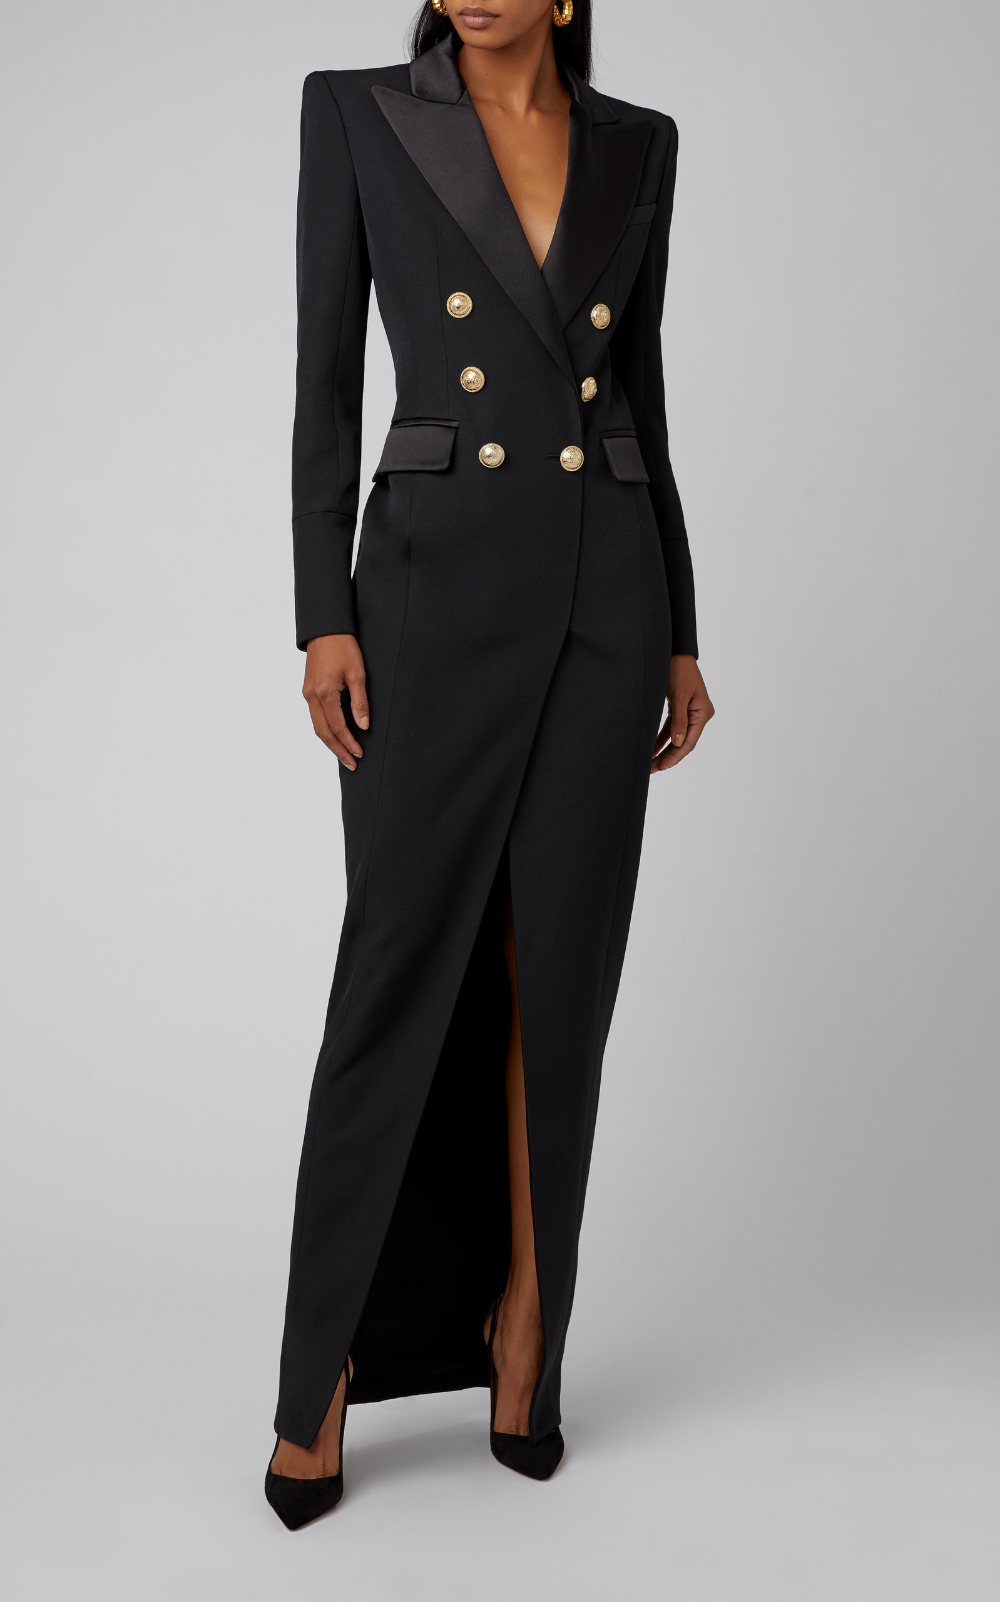 Sophisticated Tuxedo Dresses for Formal Events